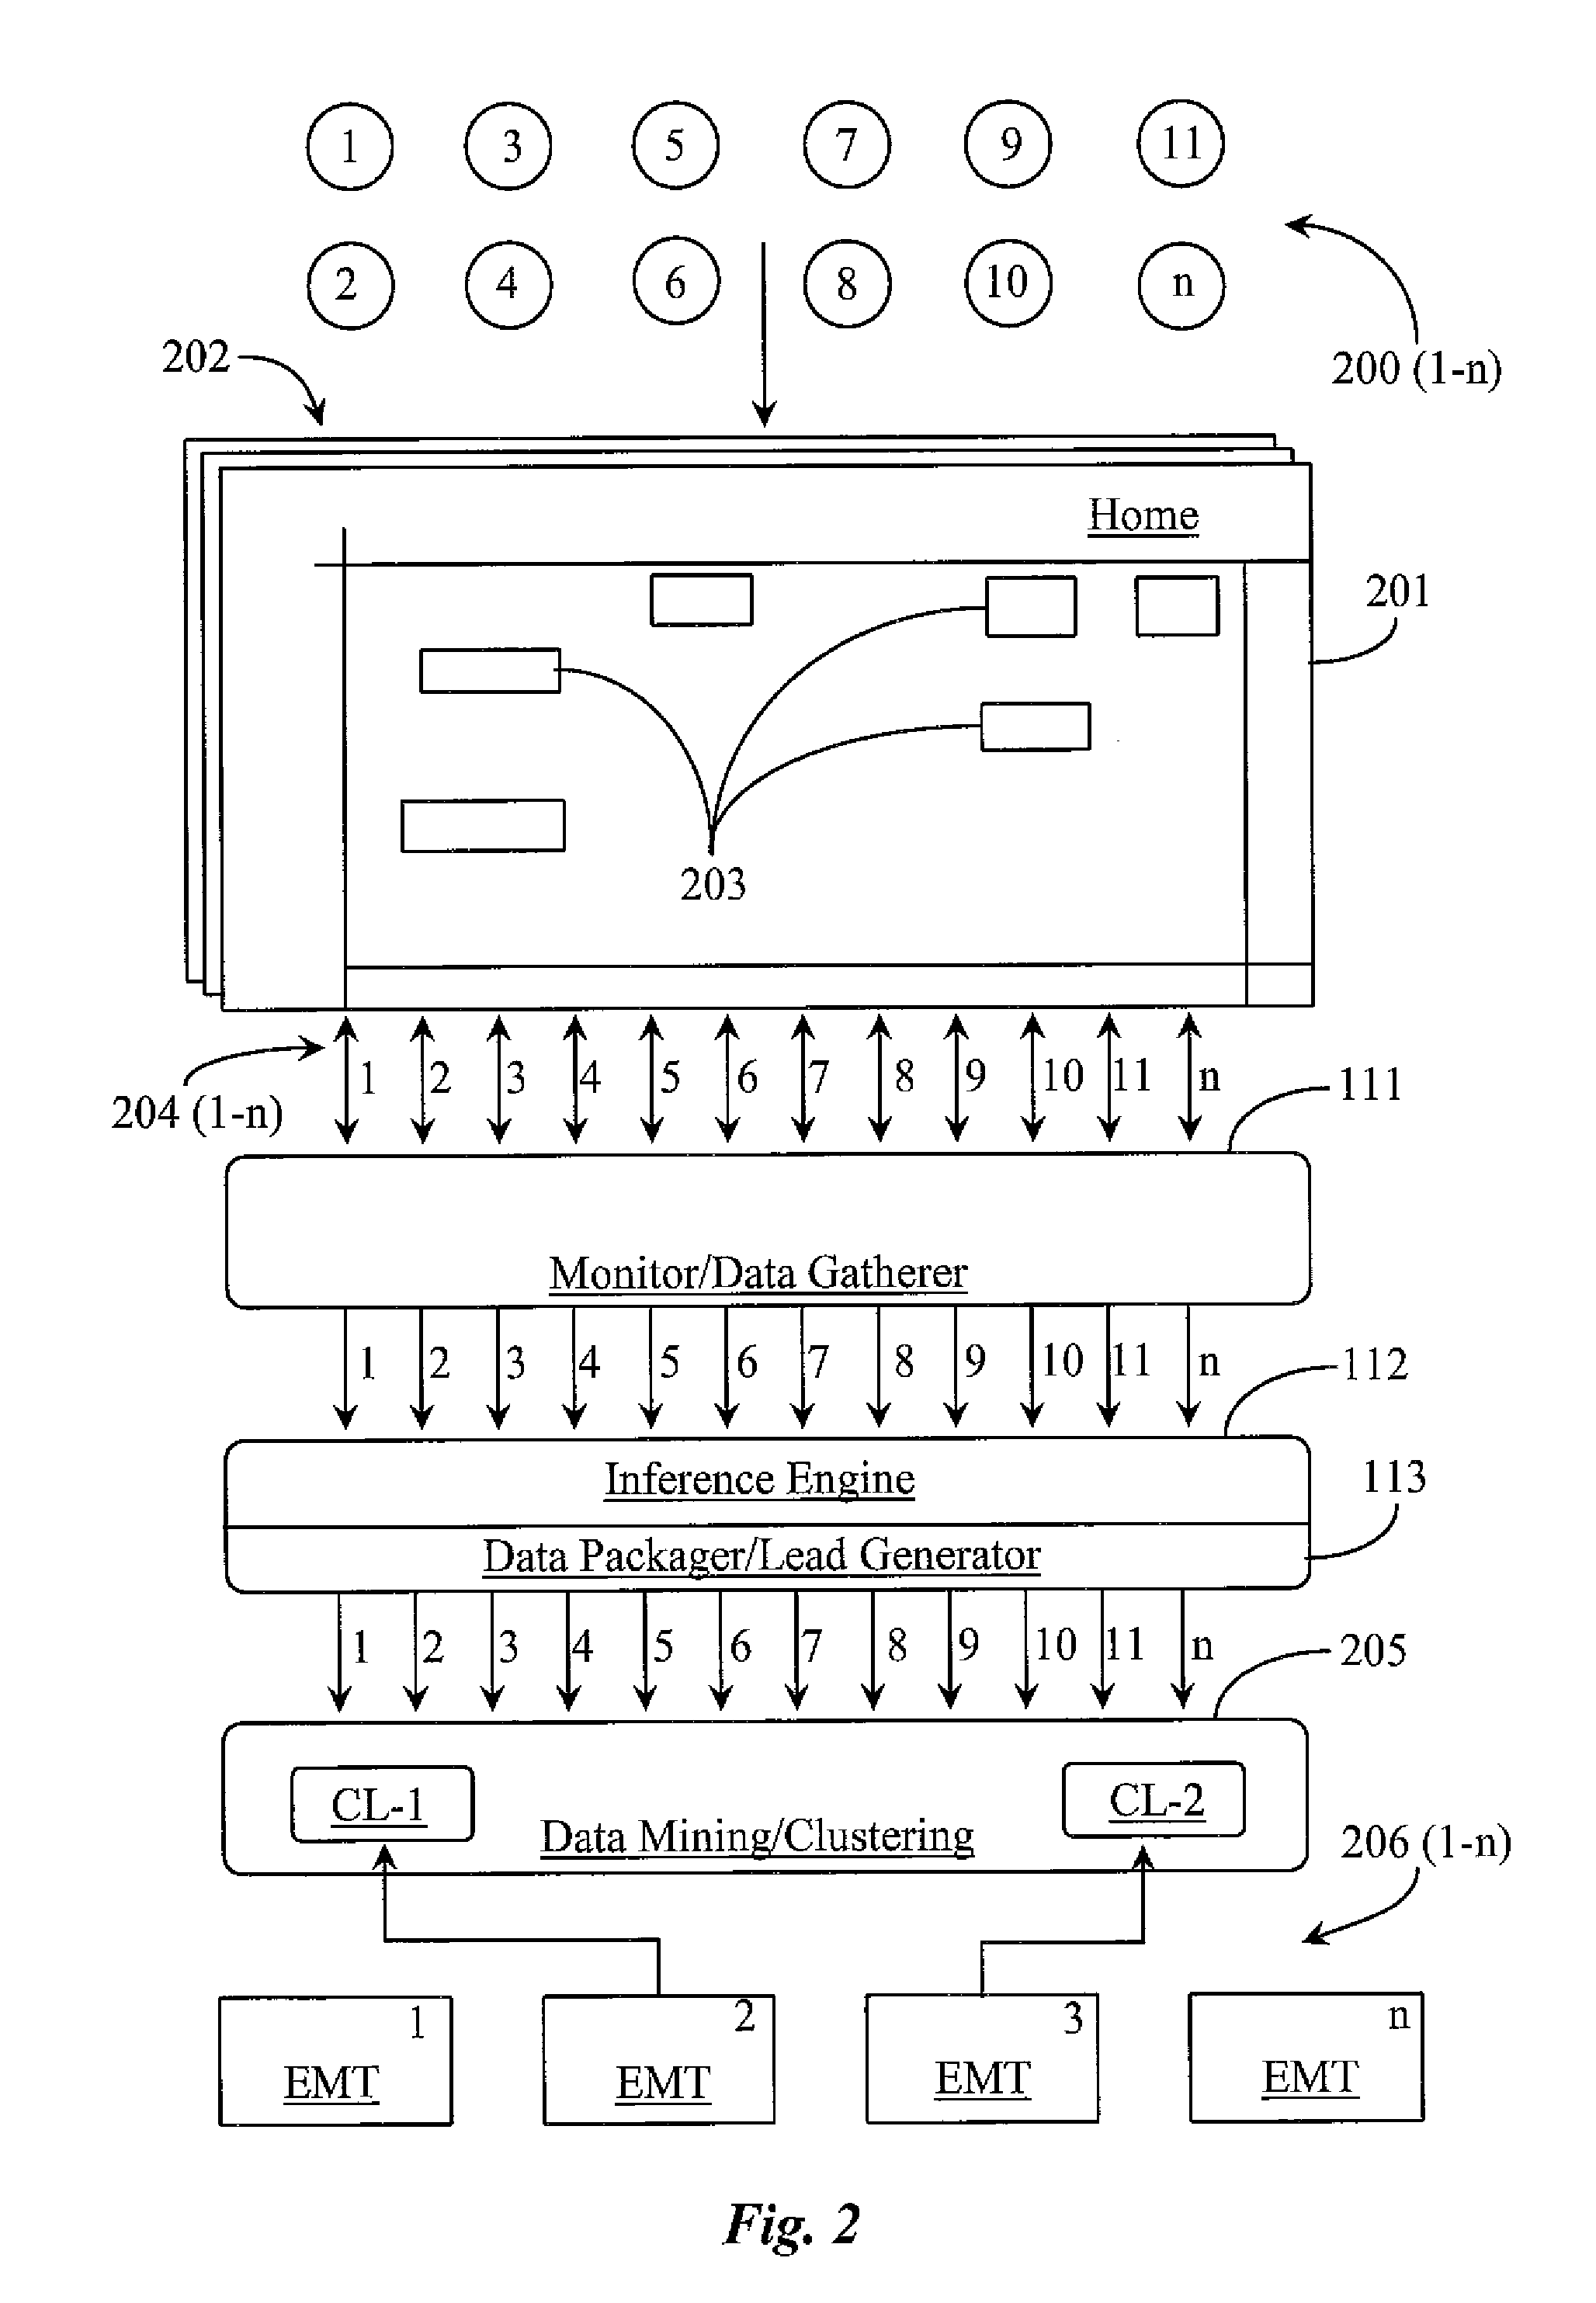 System and methods for inferring intent of website visitors and generating and packaging visitor information for distribution as sales leads or market intelligence